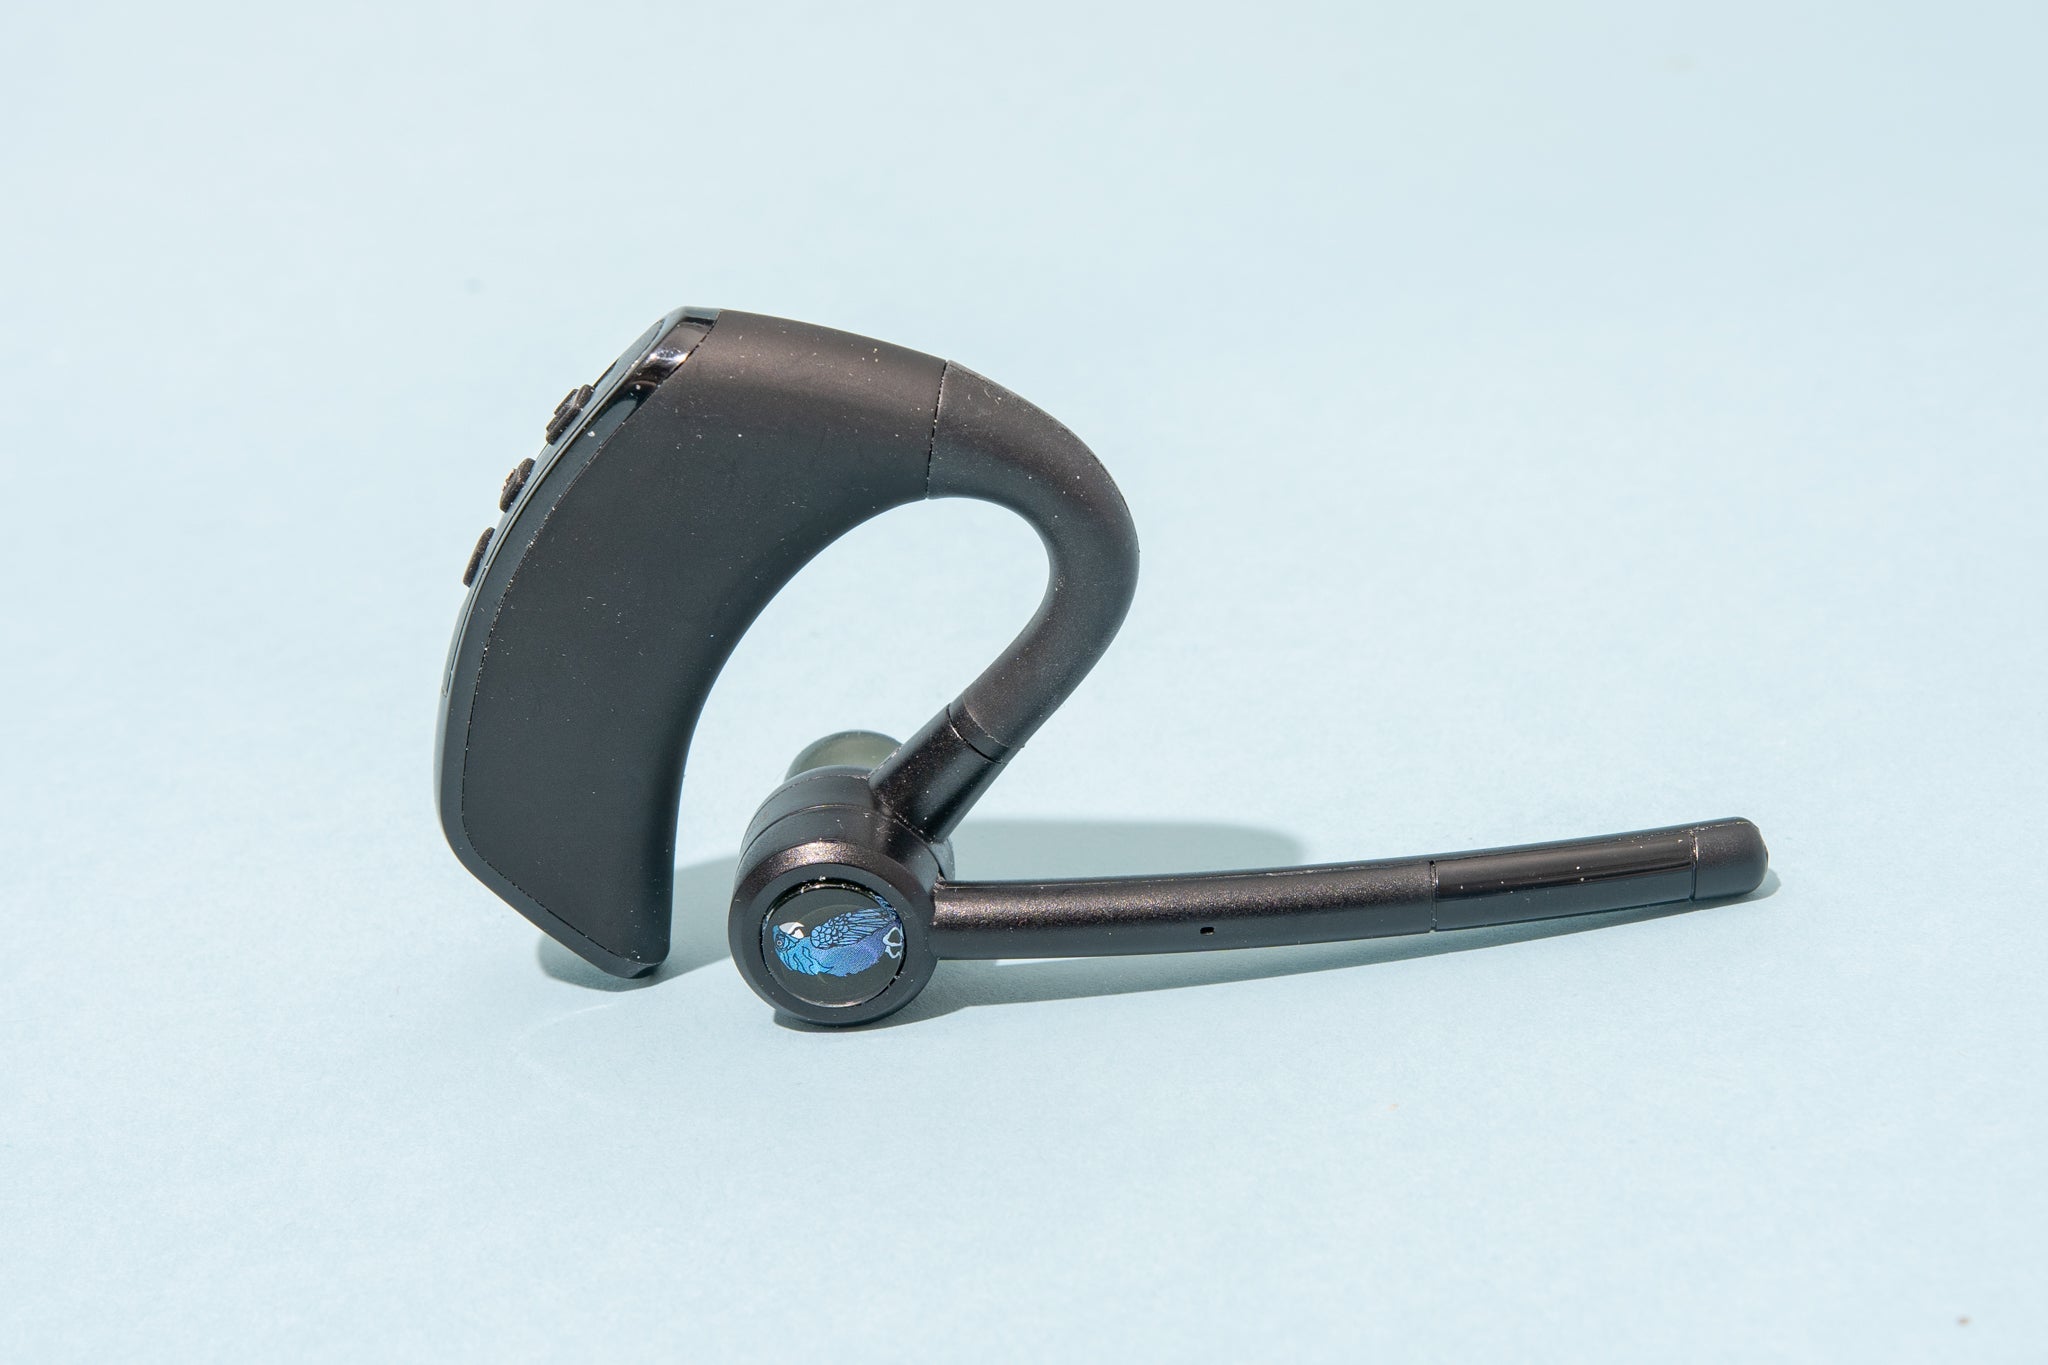 How To Turn On Noise Cancellation On Plantronics Earpiece